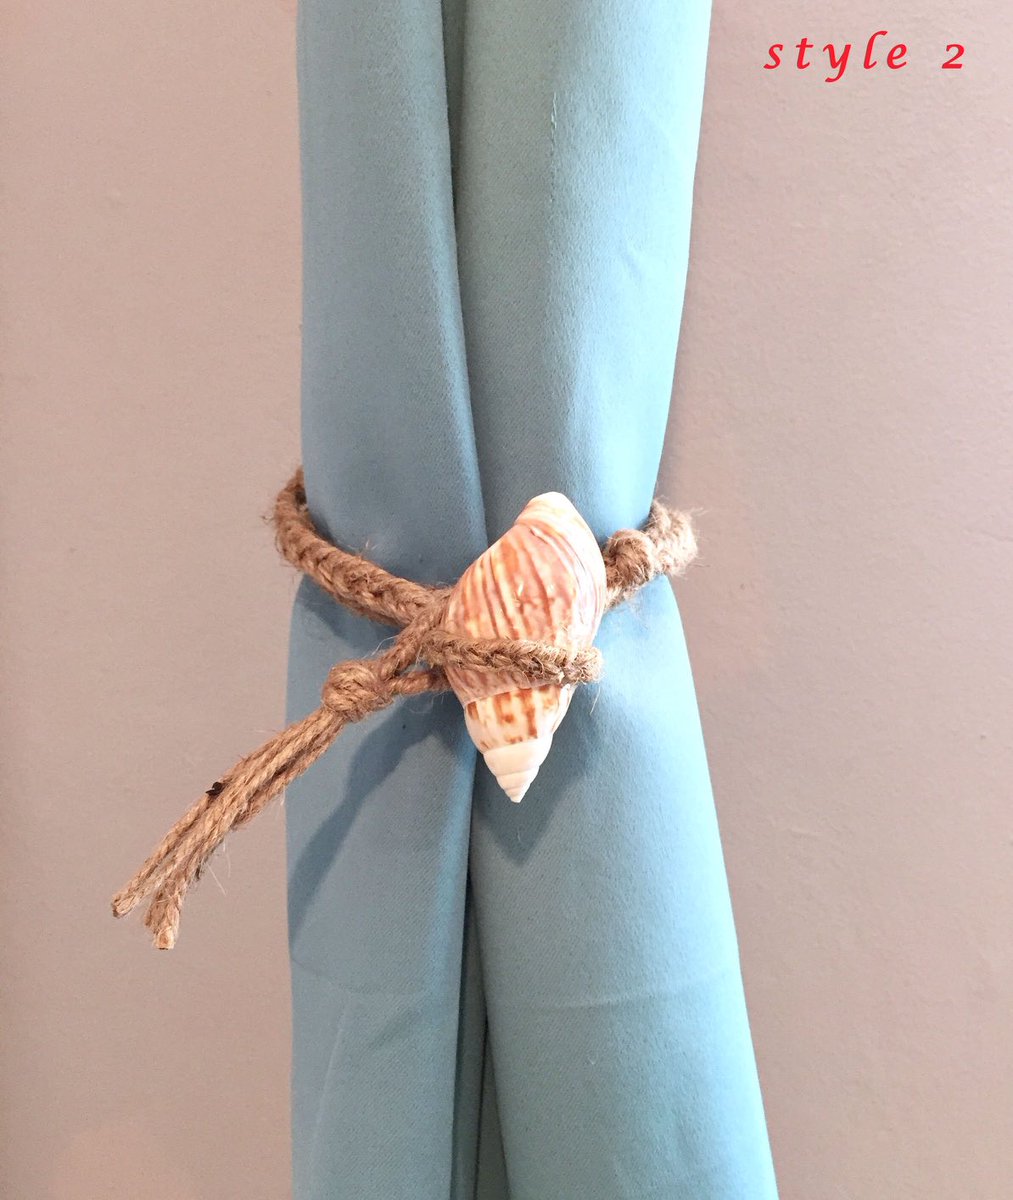 Excited to share this #seashell #curtain #tieback #beachstyle #decor lindascraftstudio.etsy.com/listing/656073…